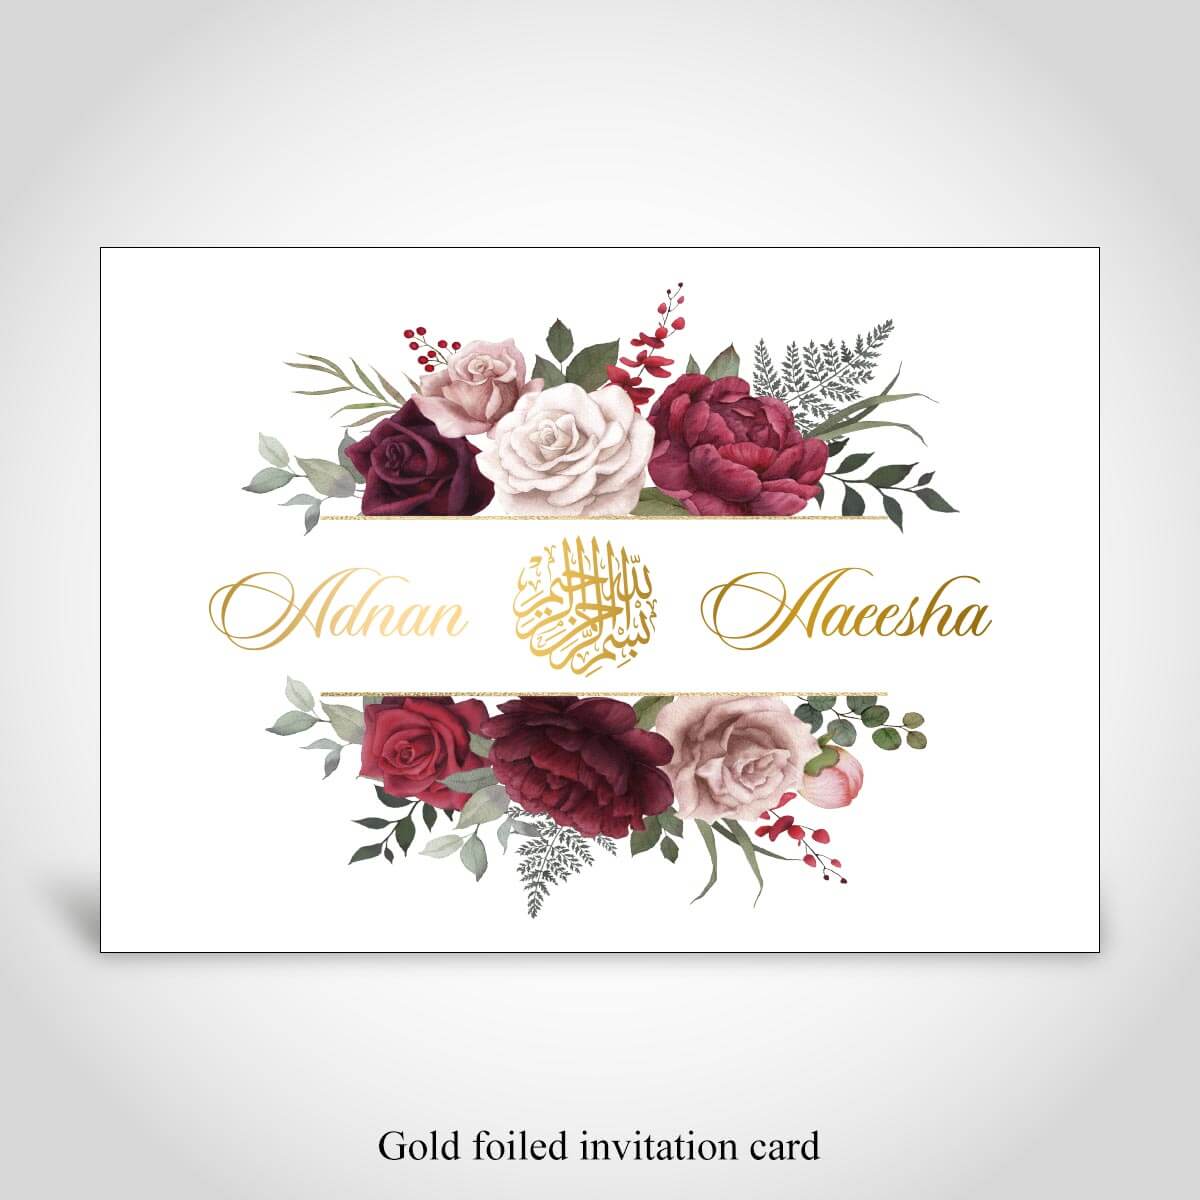 Highlight The Various Design Elements That Make Indian Wedding Cards Unique And Special CardFusion